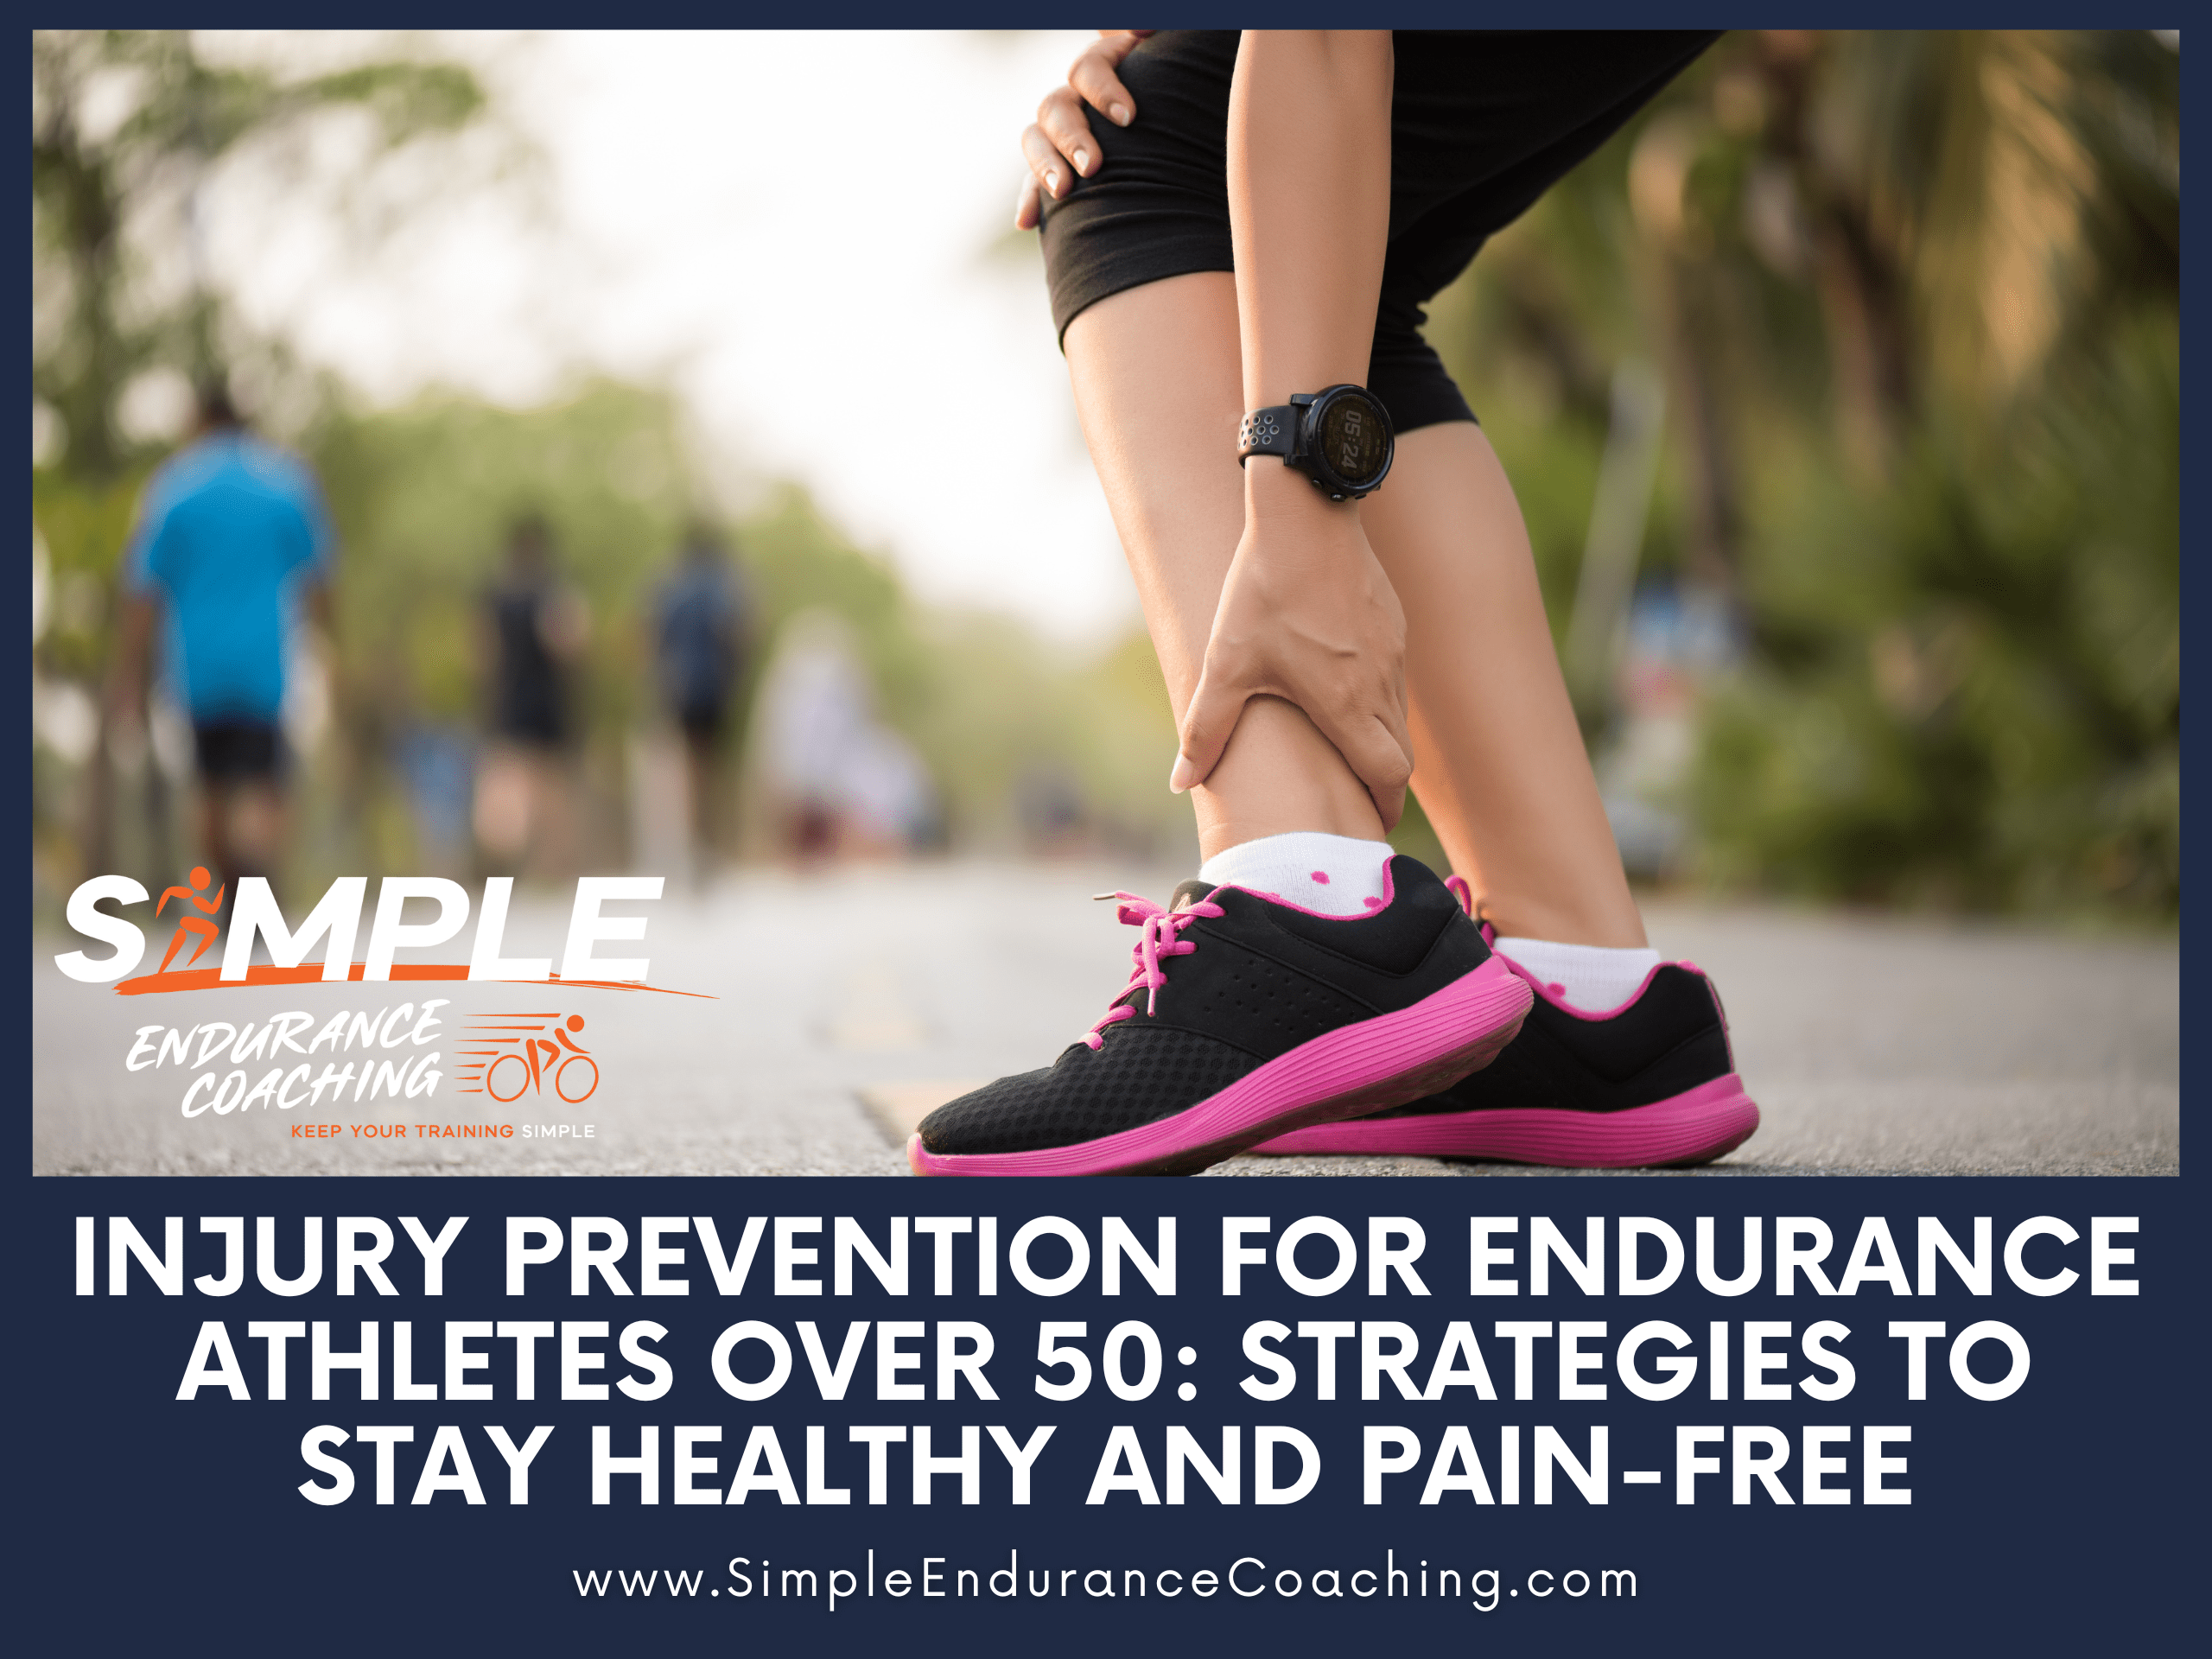 Expert tips for athletes over 50 on injury prevention, training, and recovery to stay healthy and competitive.